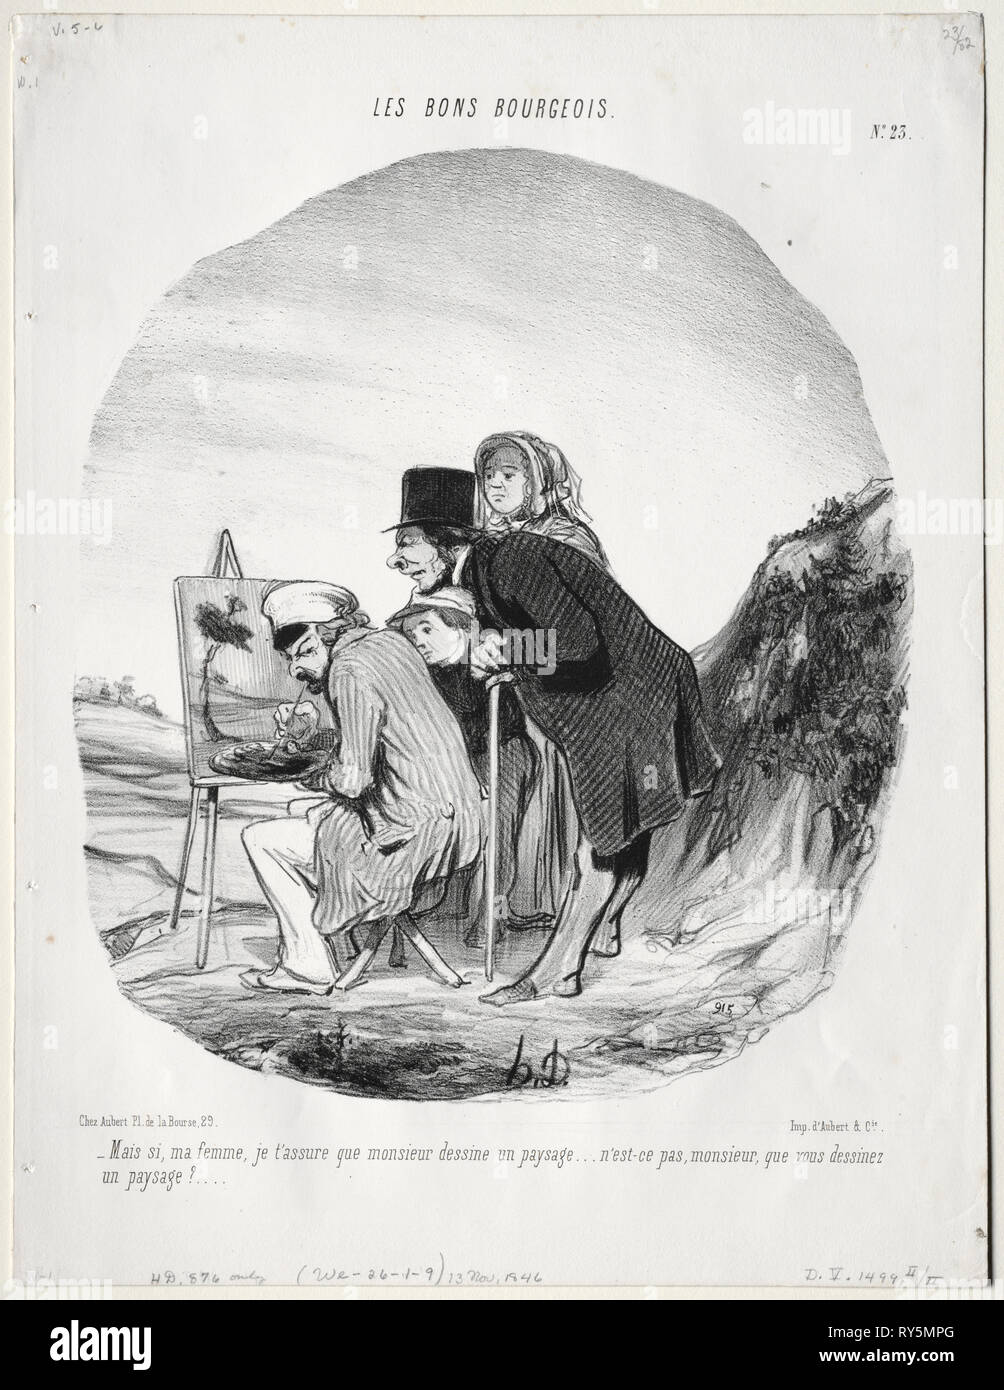 The Good Bourgeois, Plate 23: 'But yes, my dear, I assure you that this gentleman is drawing a landscape...is it not so, sir, that you are drawing a landscape?' (Les bons bourgeios, planche 23: Mais si, ma femme...monsieur dessine un paysage..), 1846. Honoré Daumier (French, 1808-1879). Lithograph; sheet: 34 x 26.1 cm (13 3/8 x 10 1/4 in Stock Photo